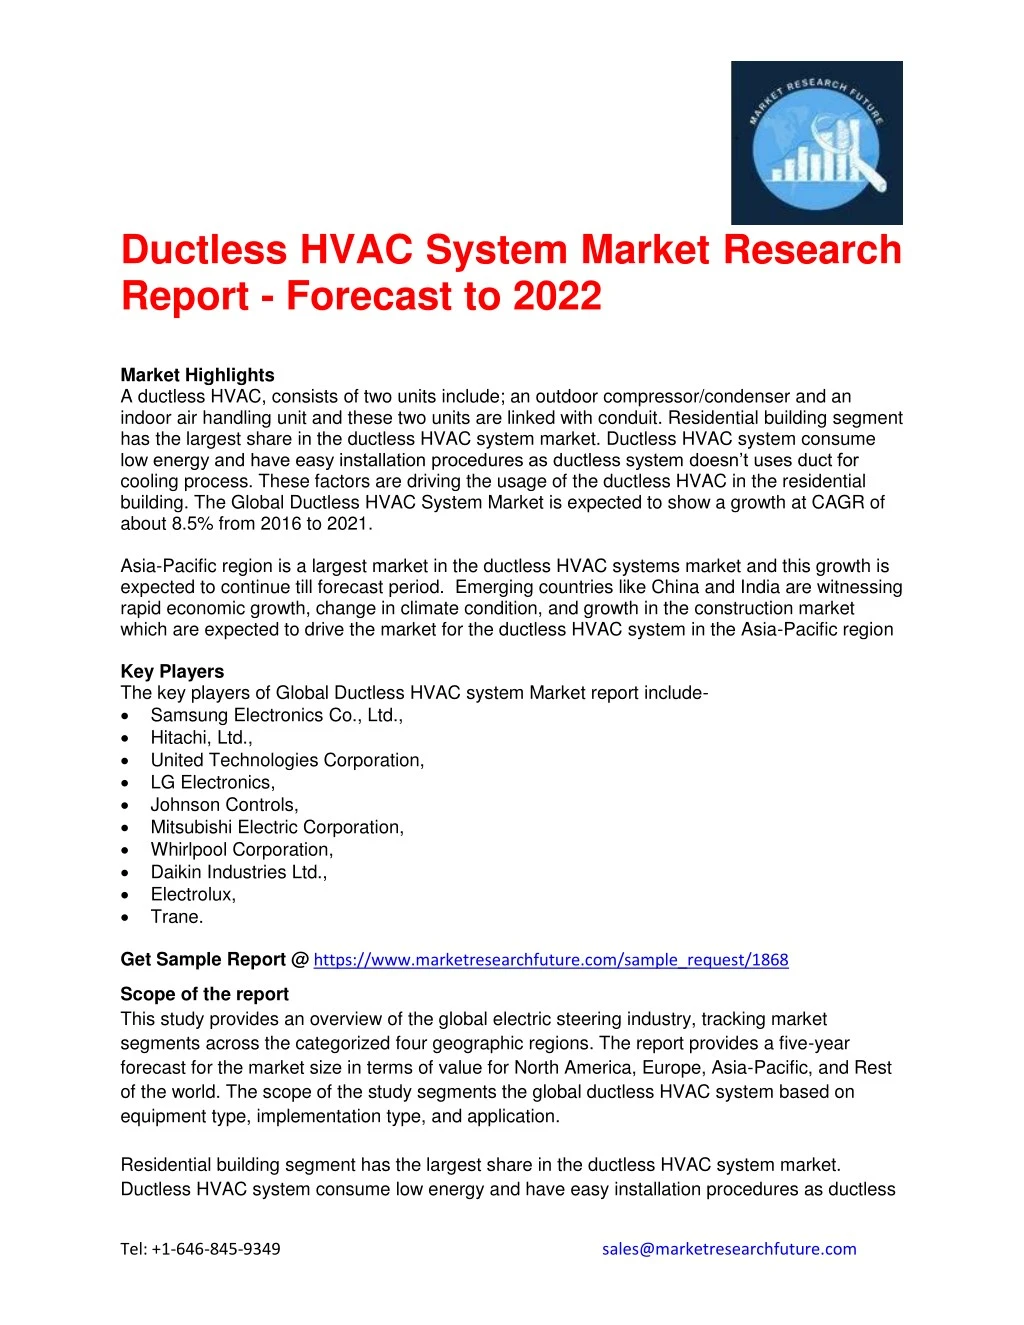 ductless hvac system market research report